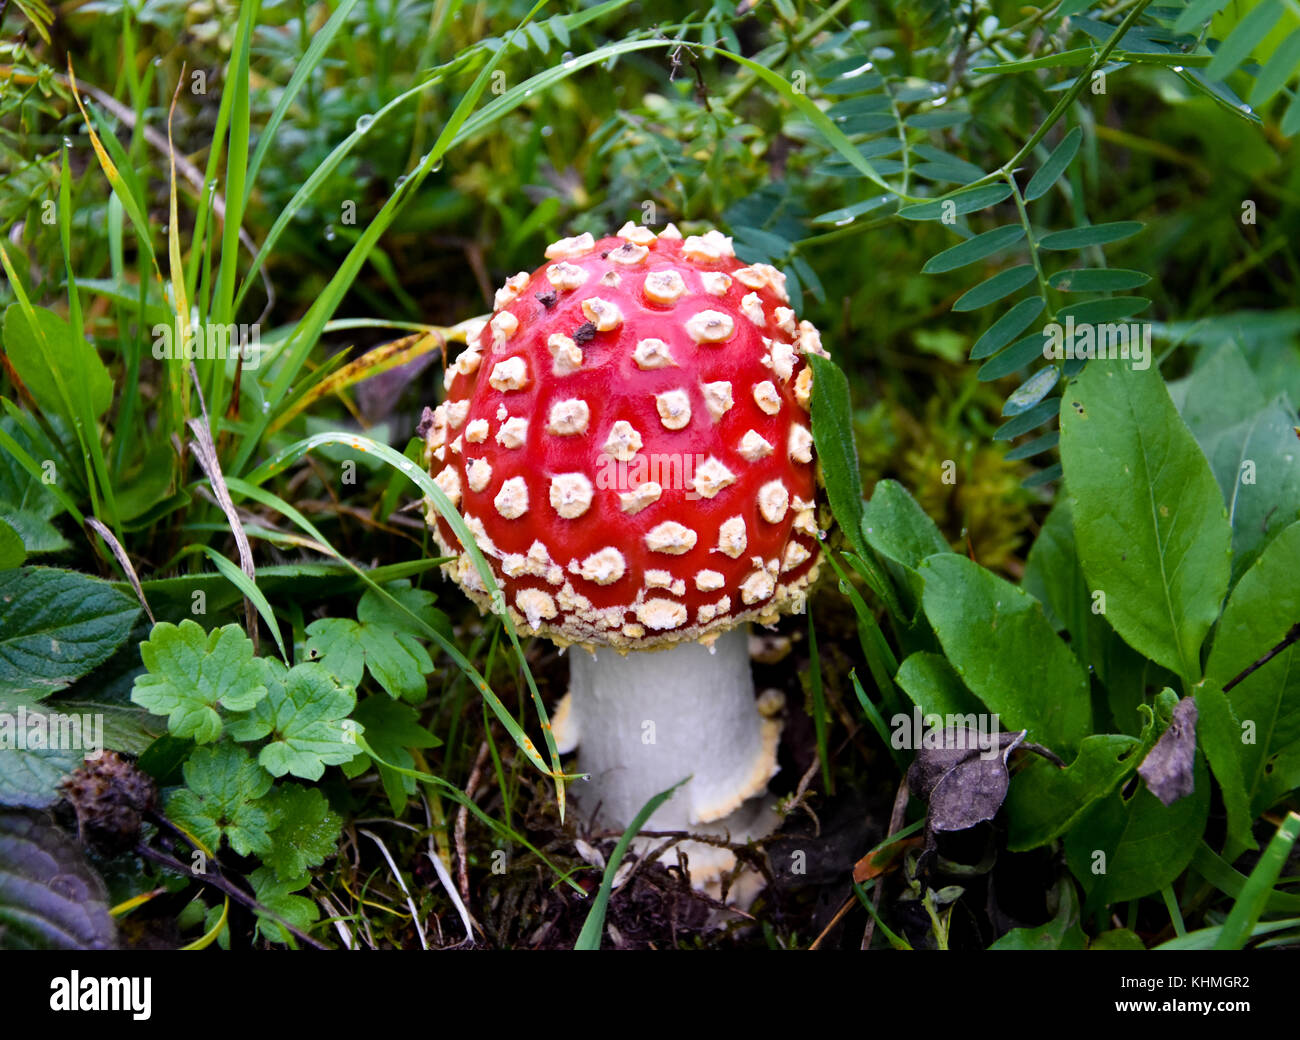 Red toxic mushroom in the grass, poisonous Stock Photo